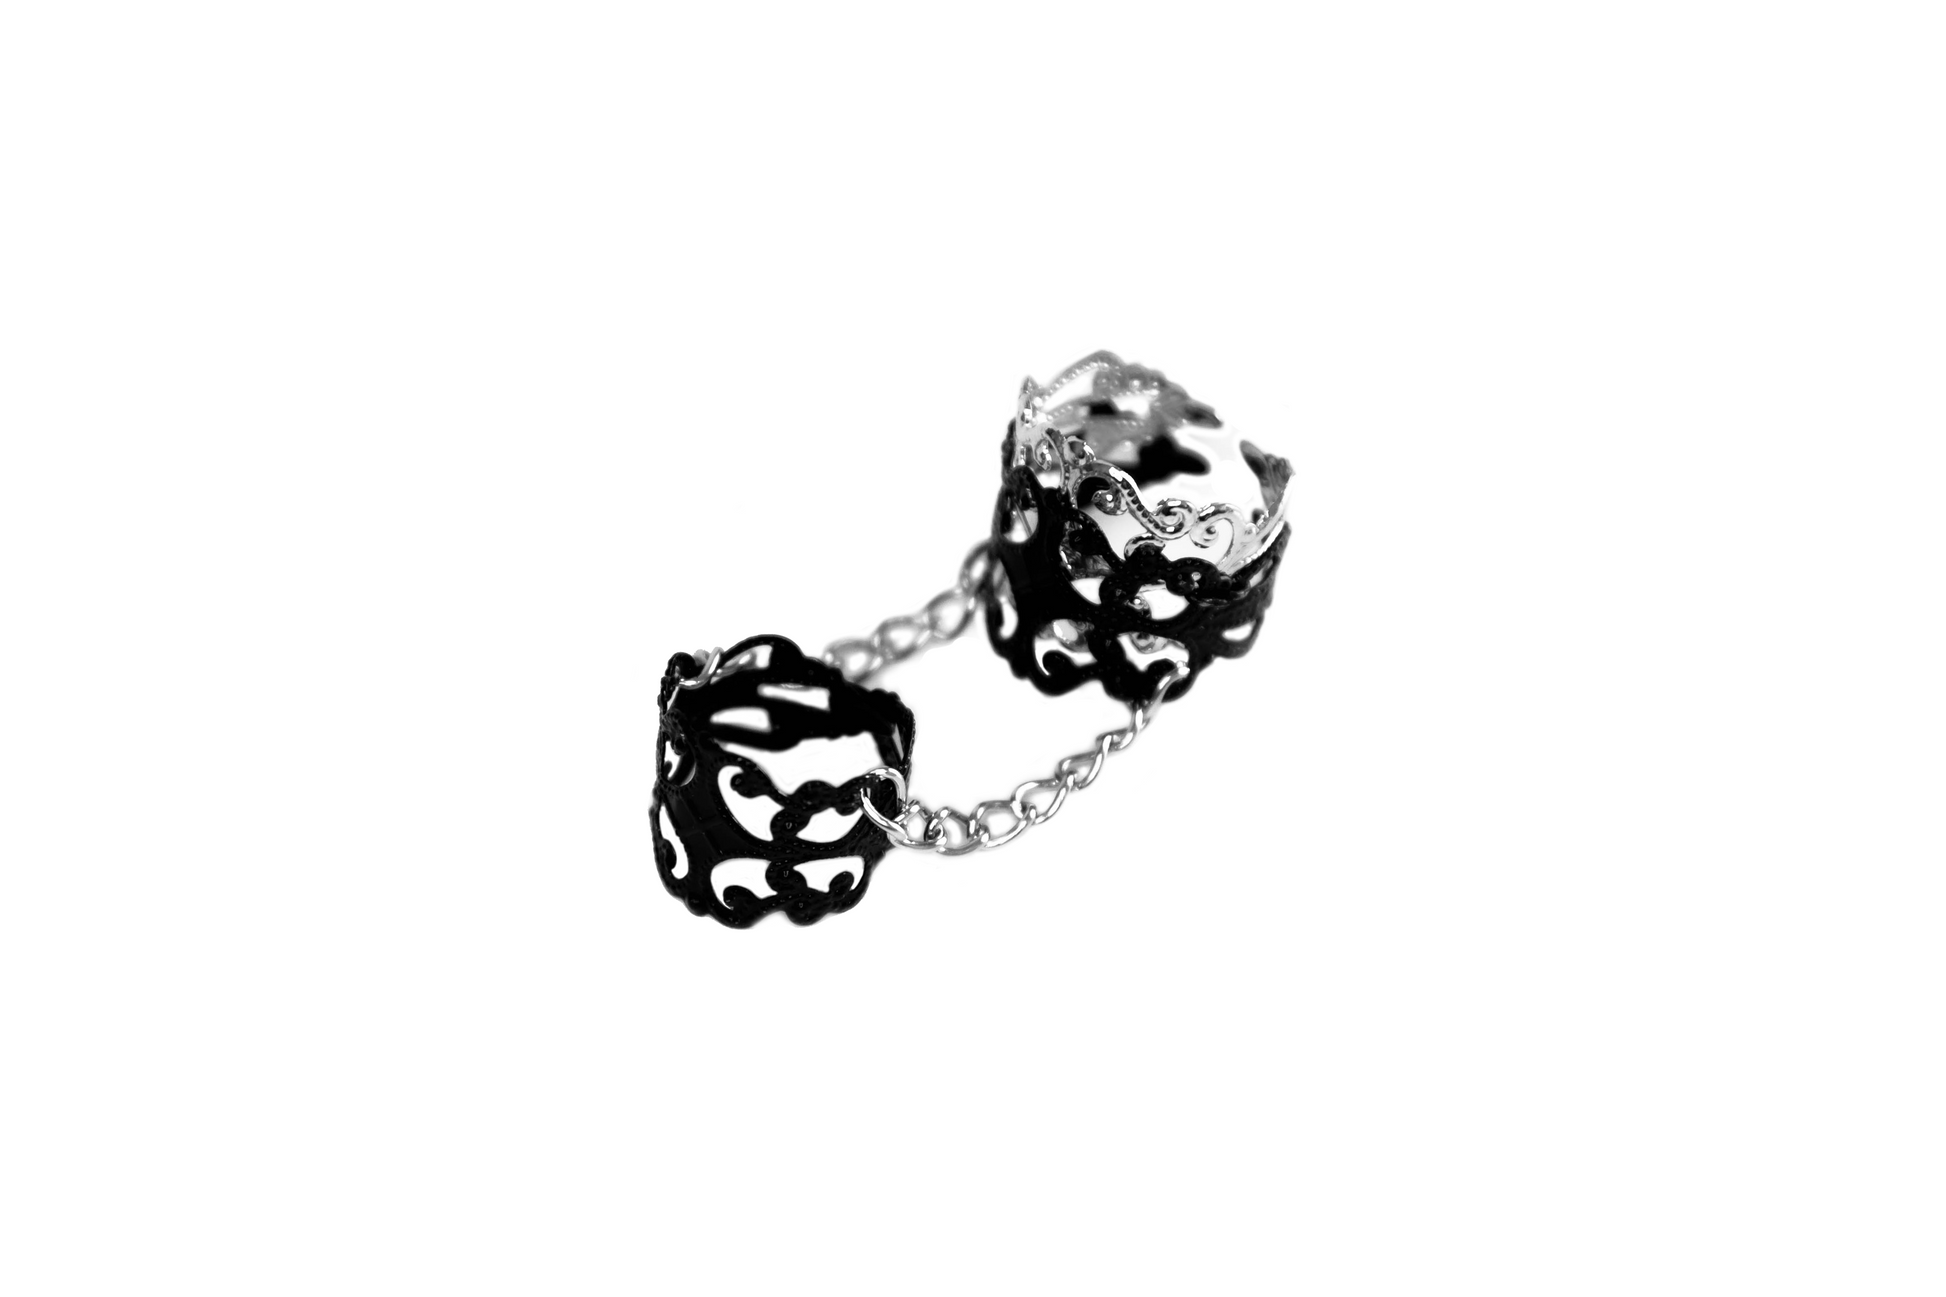 A Myril Jewels double ring, connecting two intricate bands with a delicate chain. With its Neo Gothic flair, this piece is a perfect touch for Halloween ensembles, witchcore aesthetics, or as a distinctive goth girlfriend gift. It encapsulates the essence of minimal goth, ideal for both everyday wear and festival occasions.